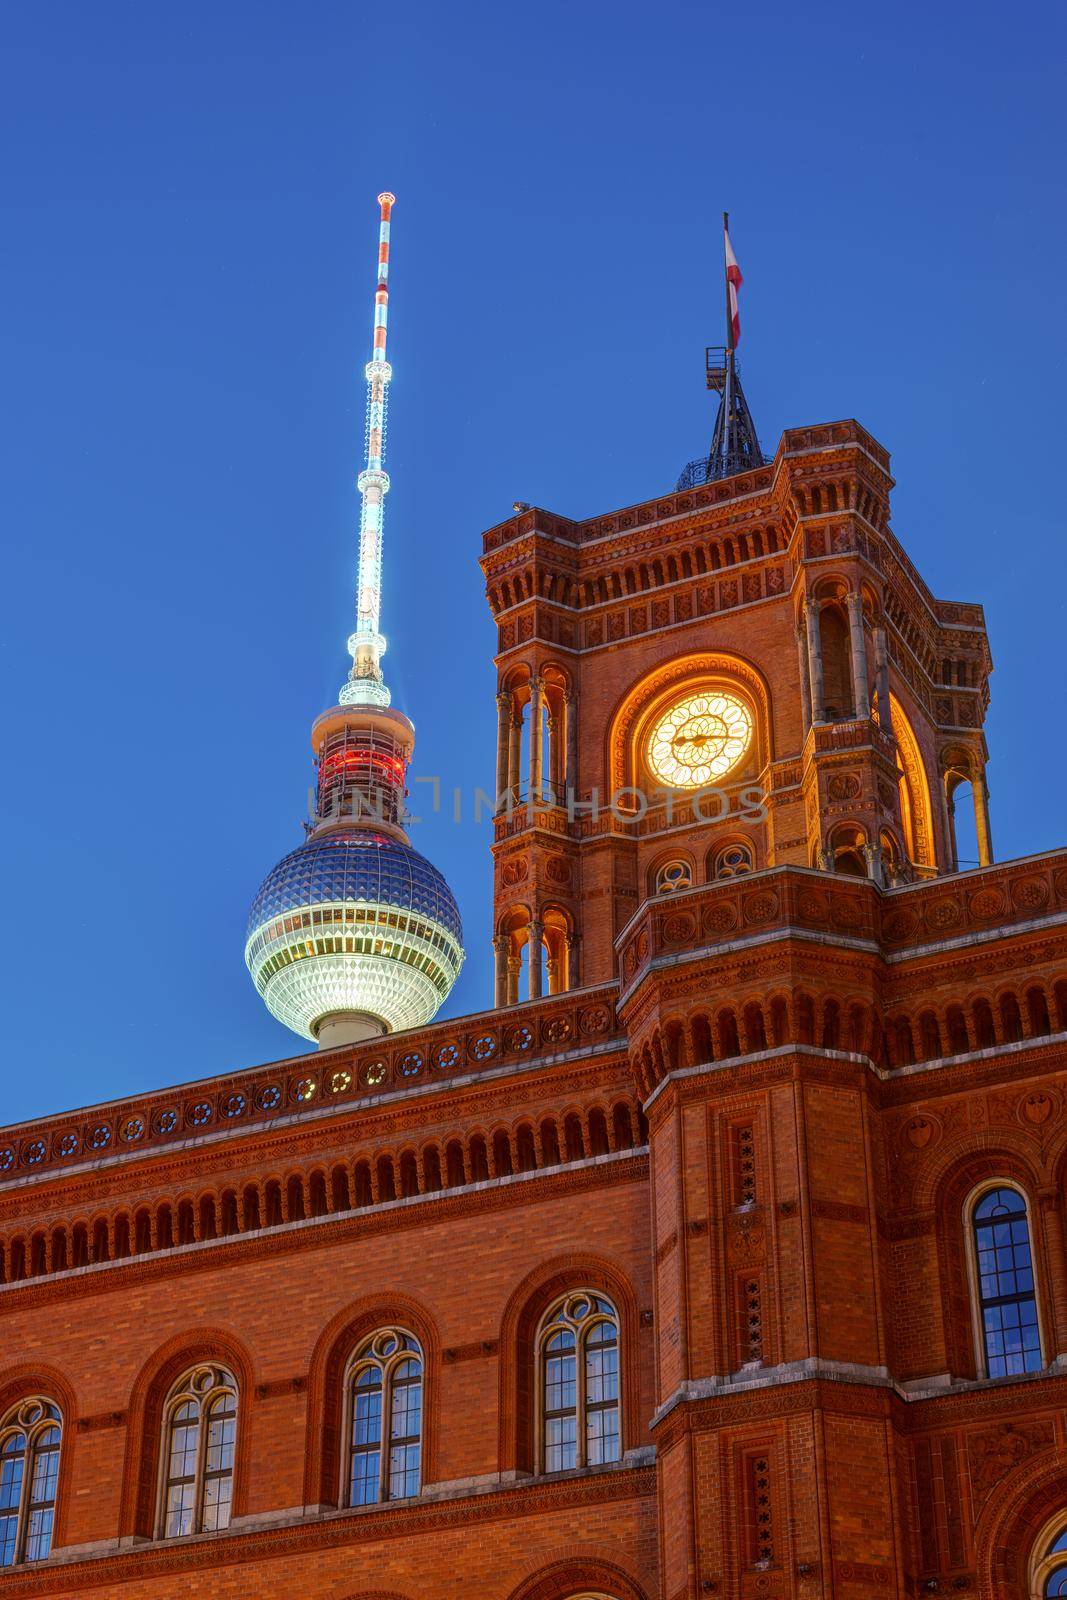 The town hall and the famous Television Tower in Berlin at night